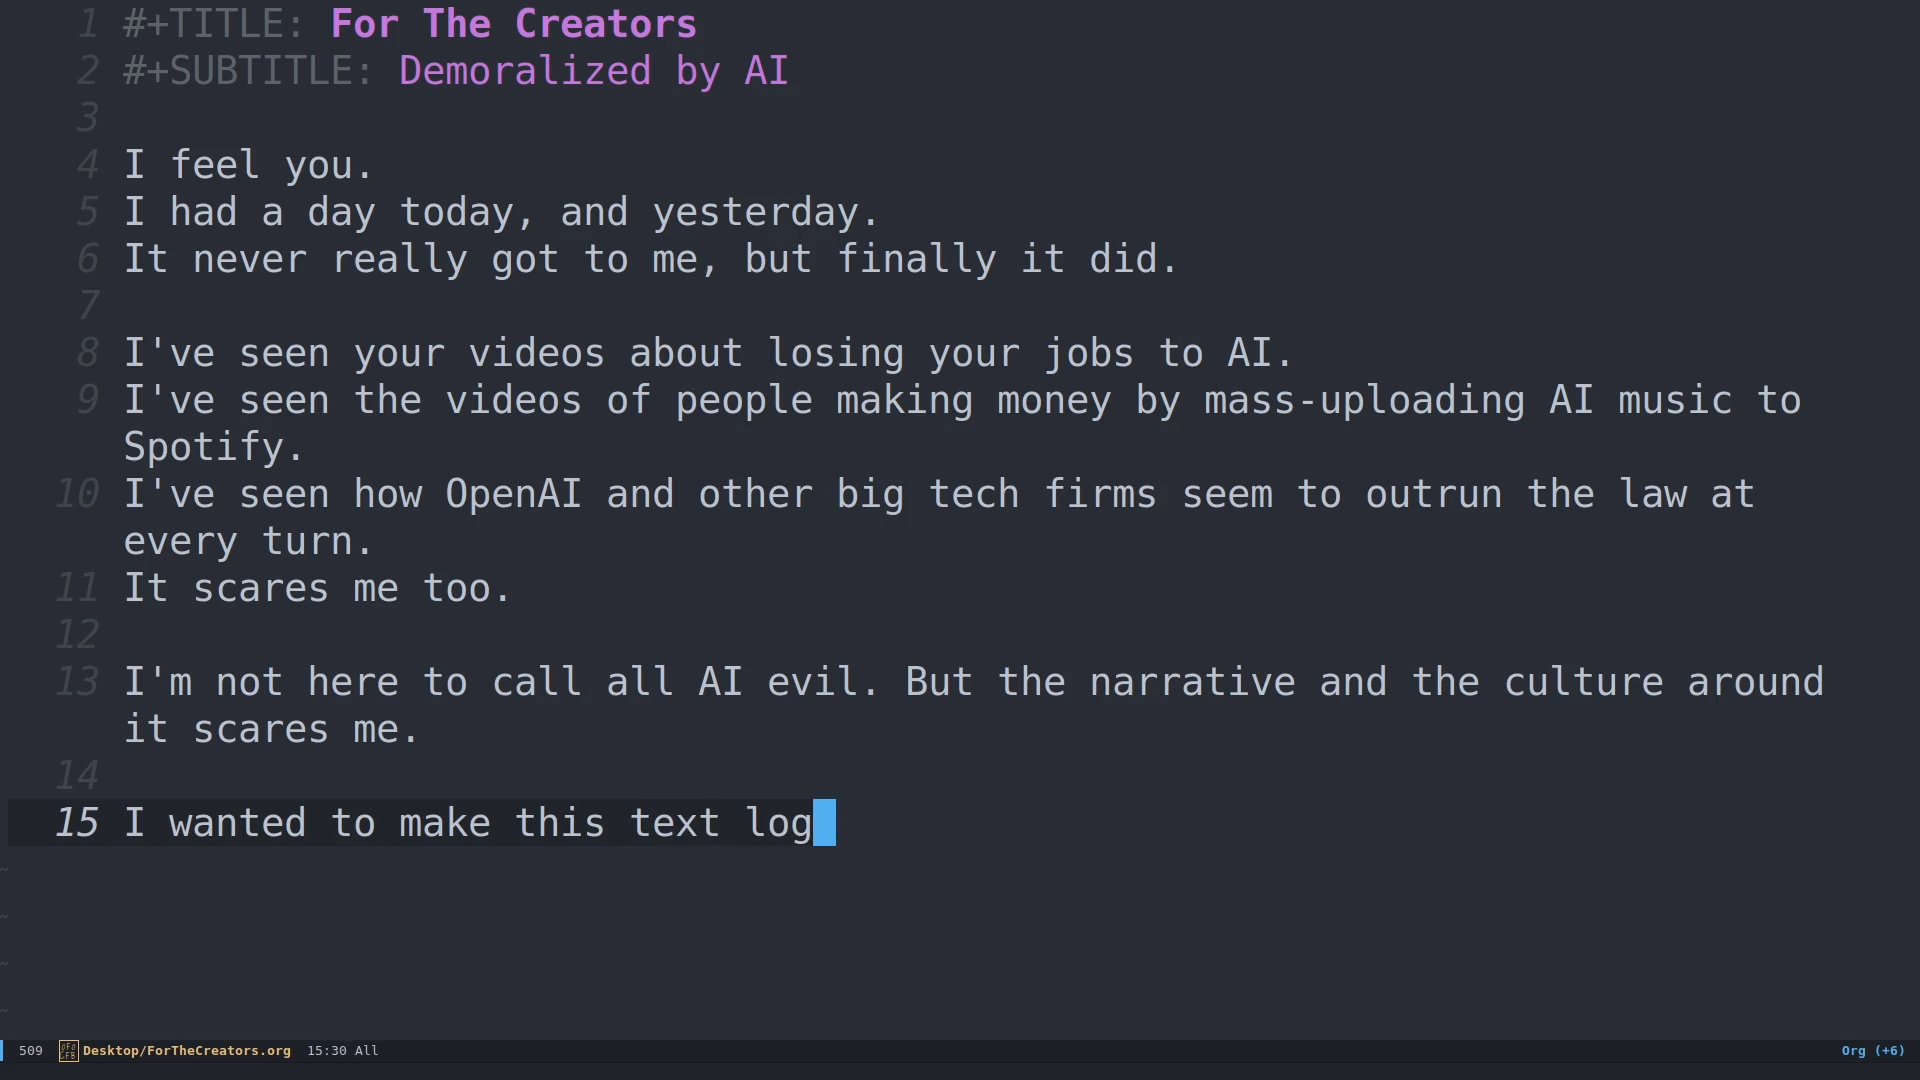 [Text] For the Creators demoralized by AI